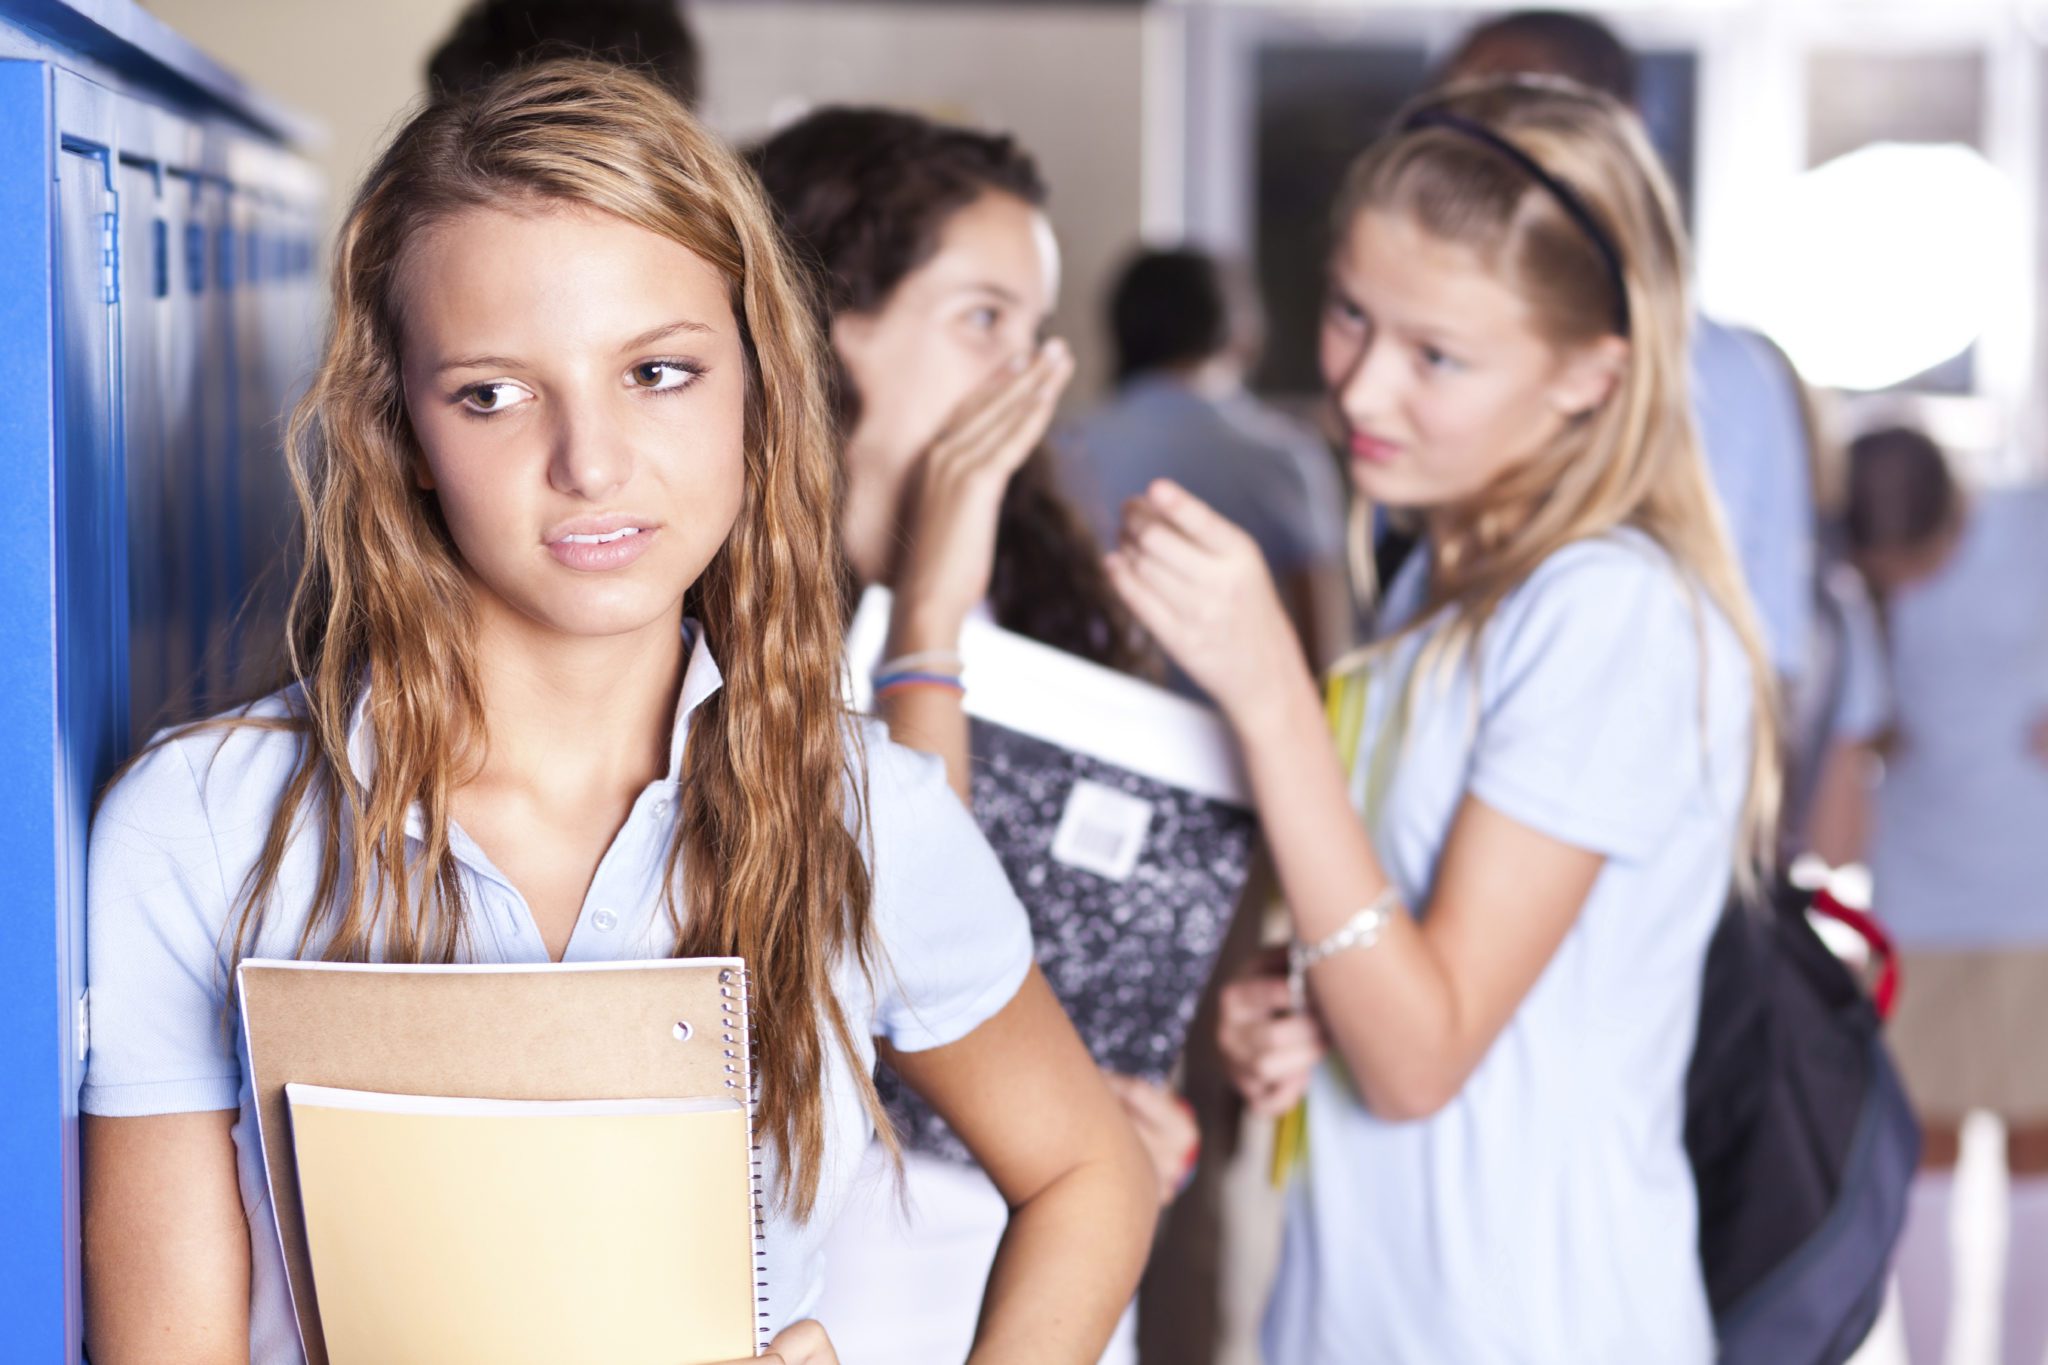 Middle School - Young teen standing at lockers with other teens in the background